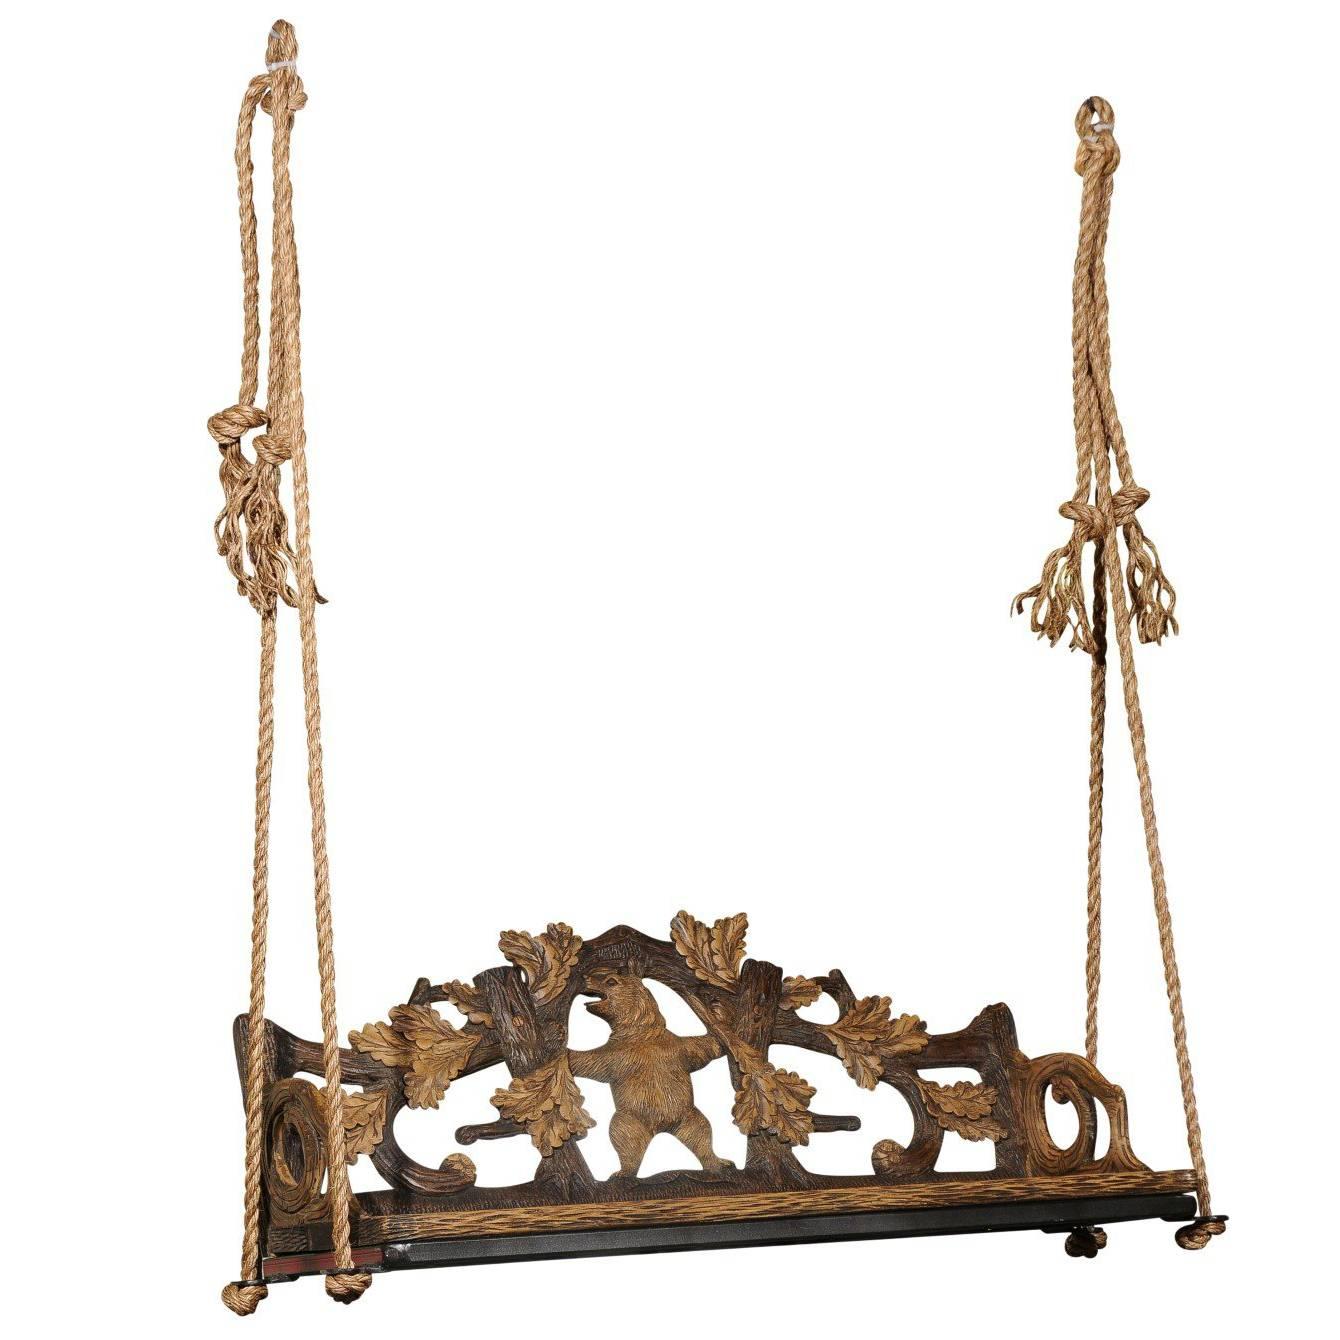 Black Forest 1890s Carved Bench with Bear Motif Made into a Swing, Switzerland